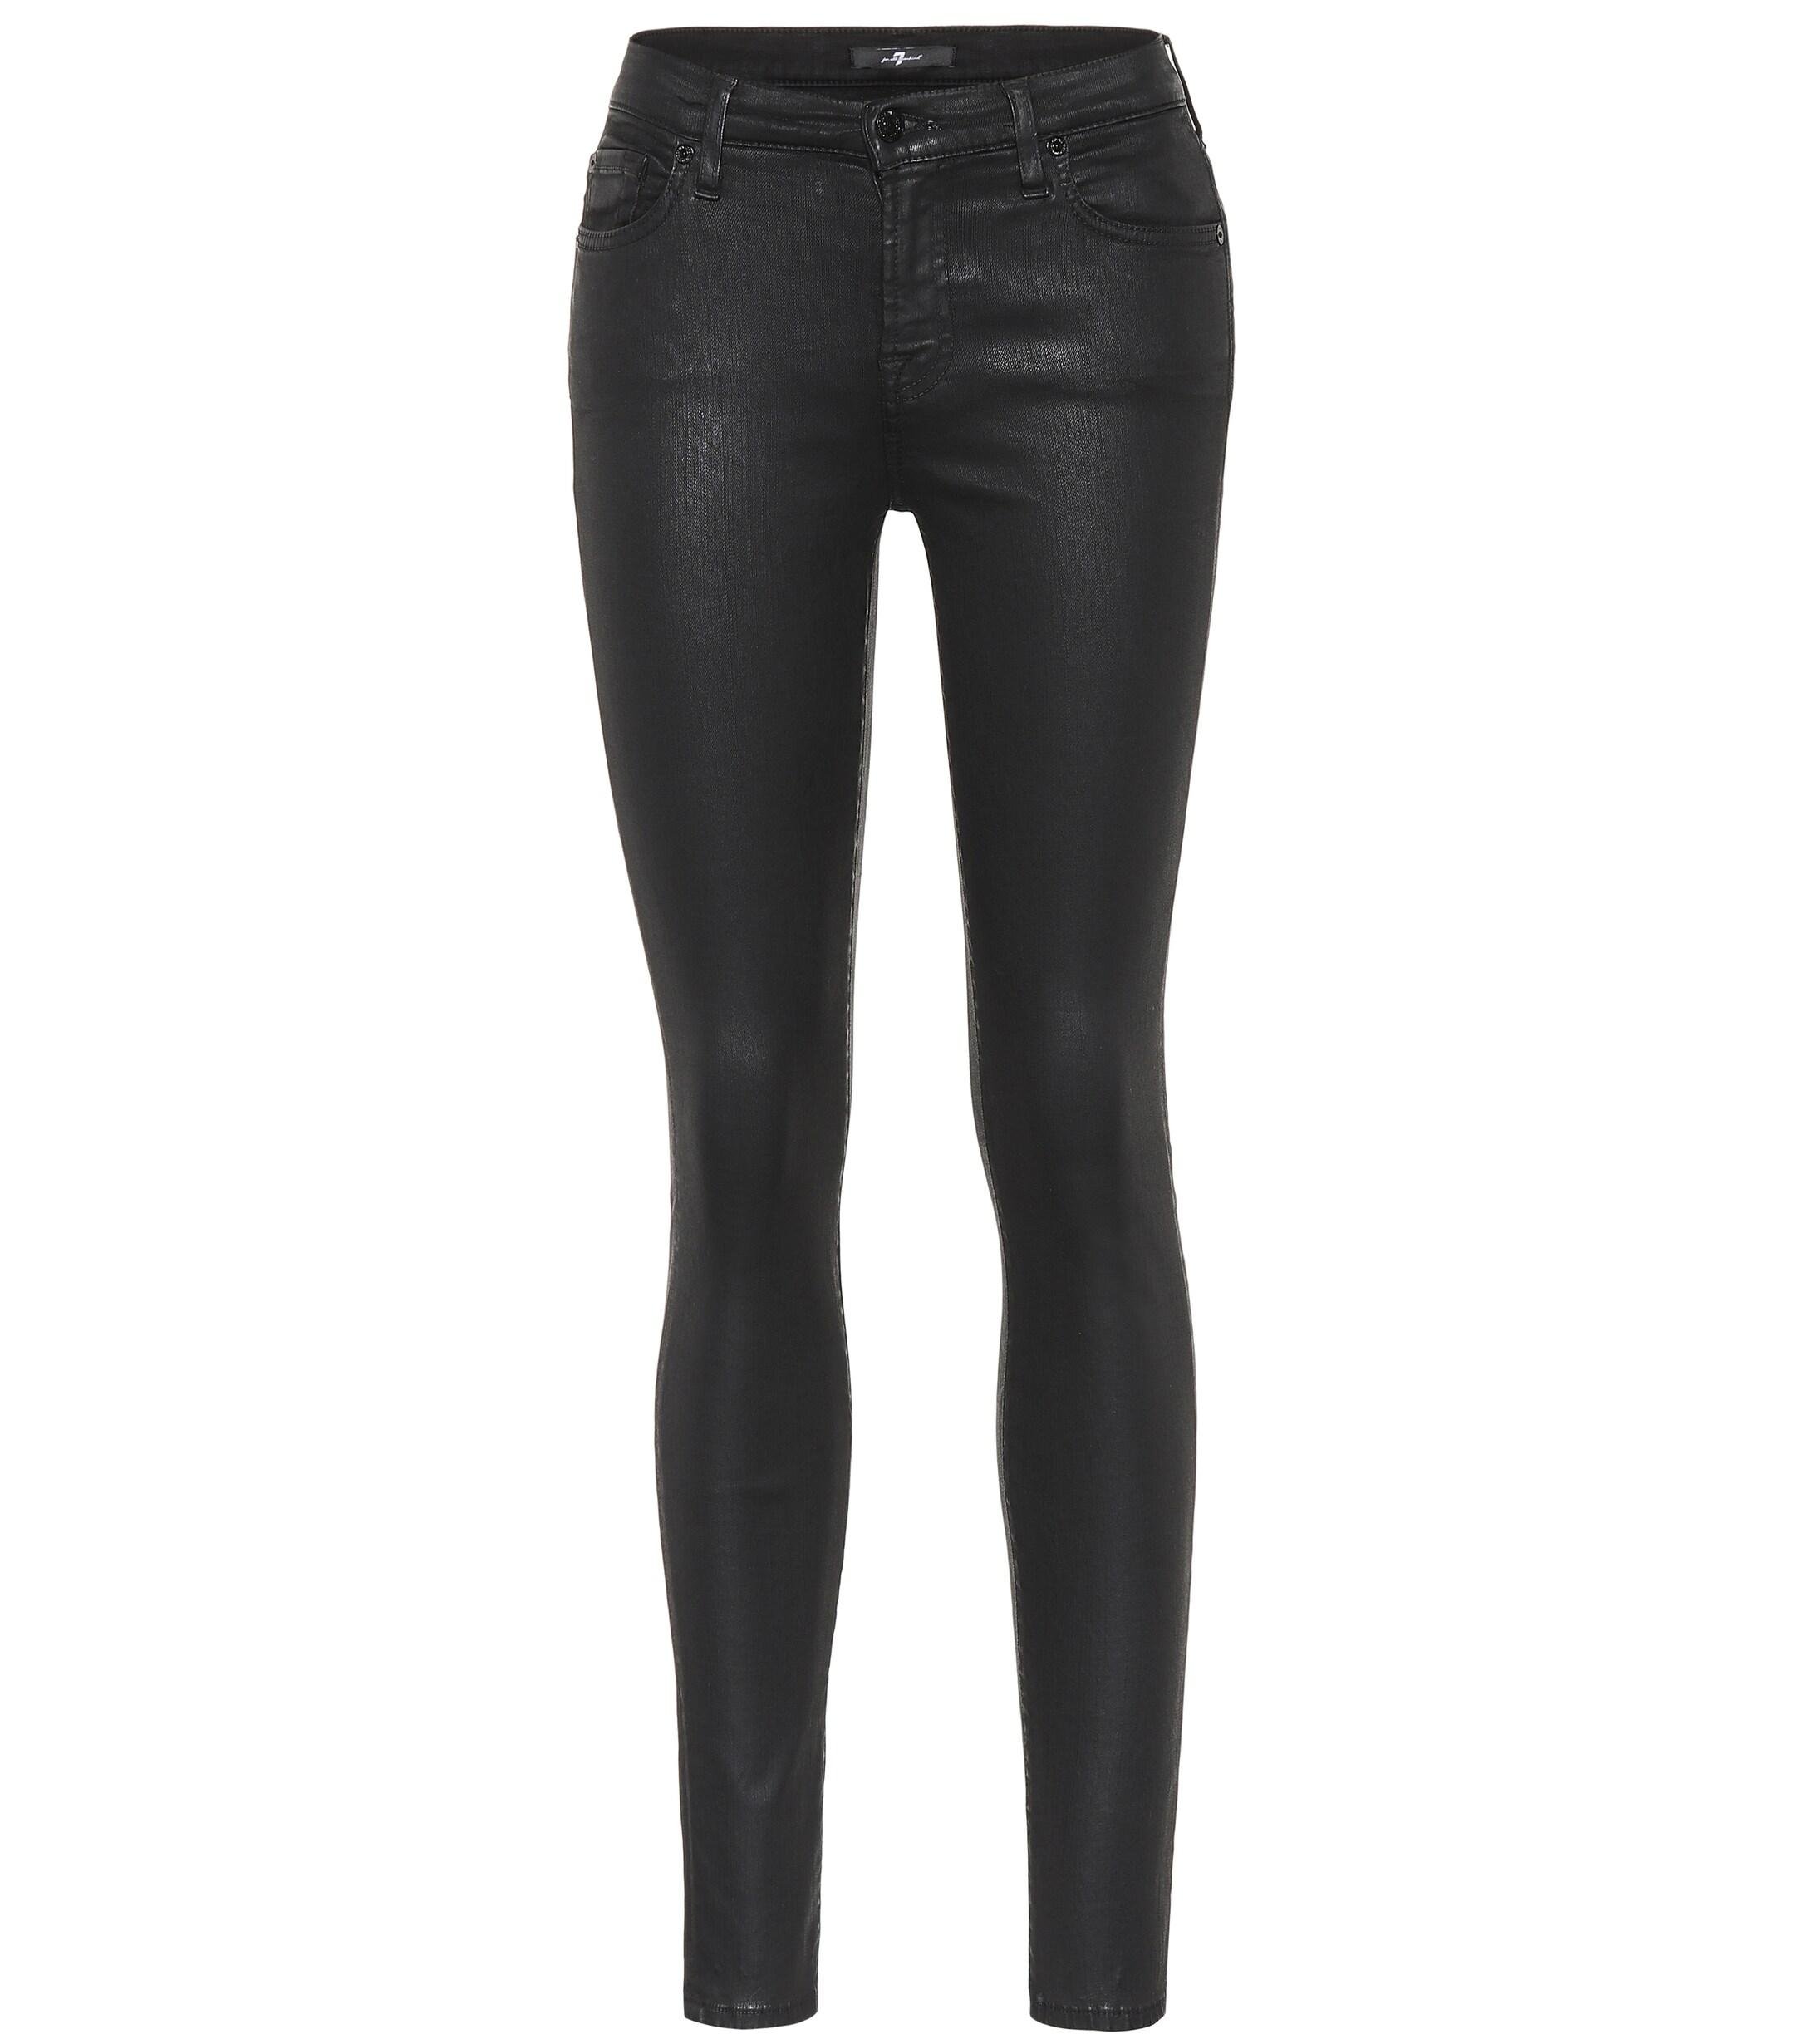 7 For All Mankind Denim The Skinny Mid-rise Jeans in Black - Lyst